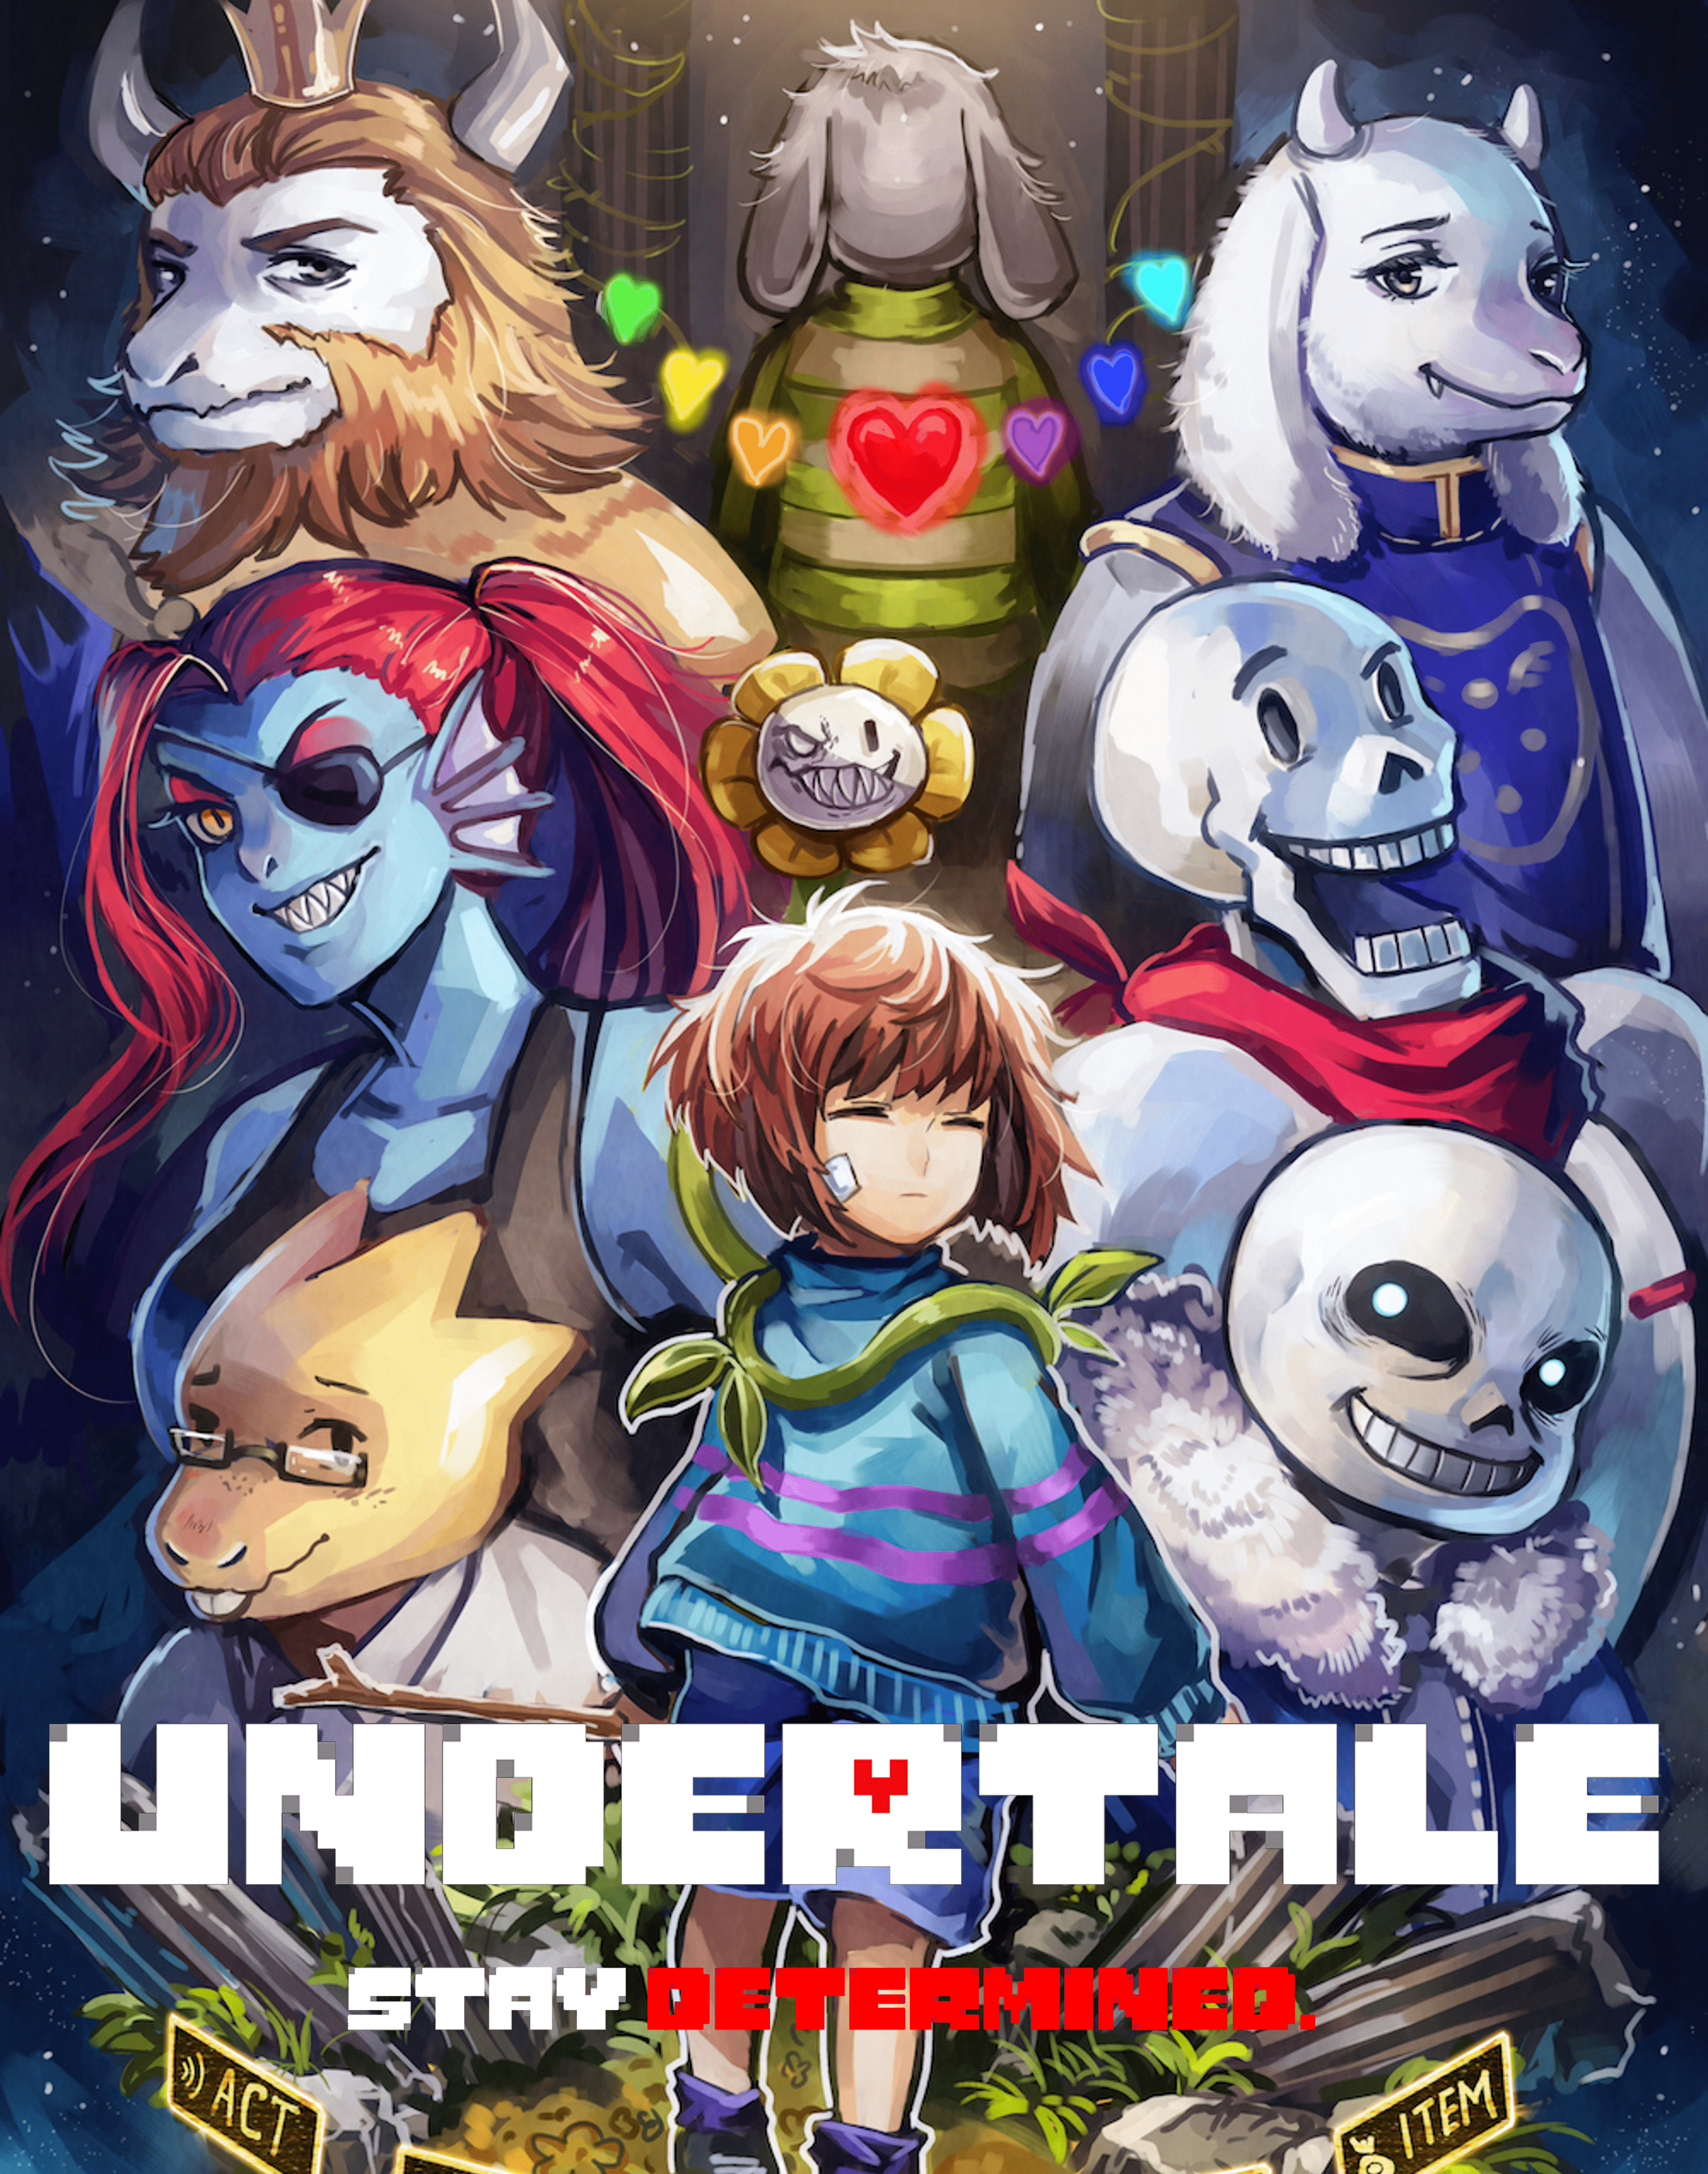 static.wikia.nocookie.net/undertale/images/a/a6/Sa